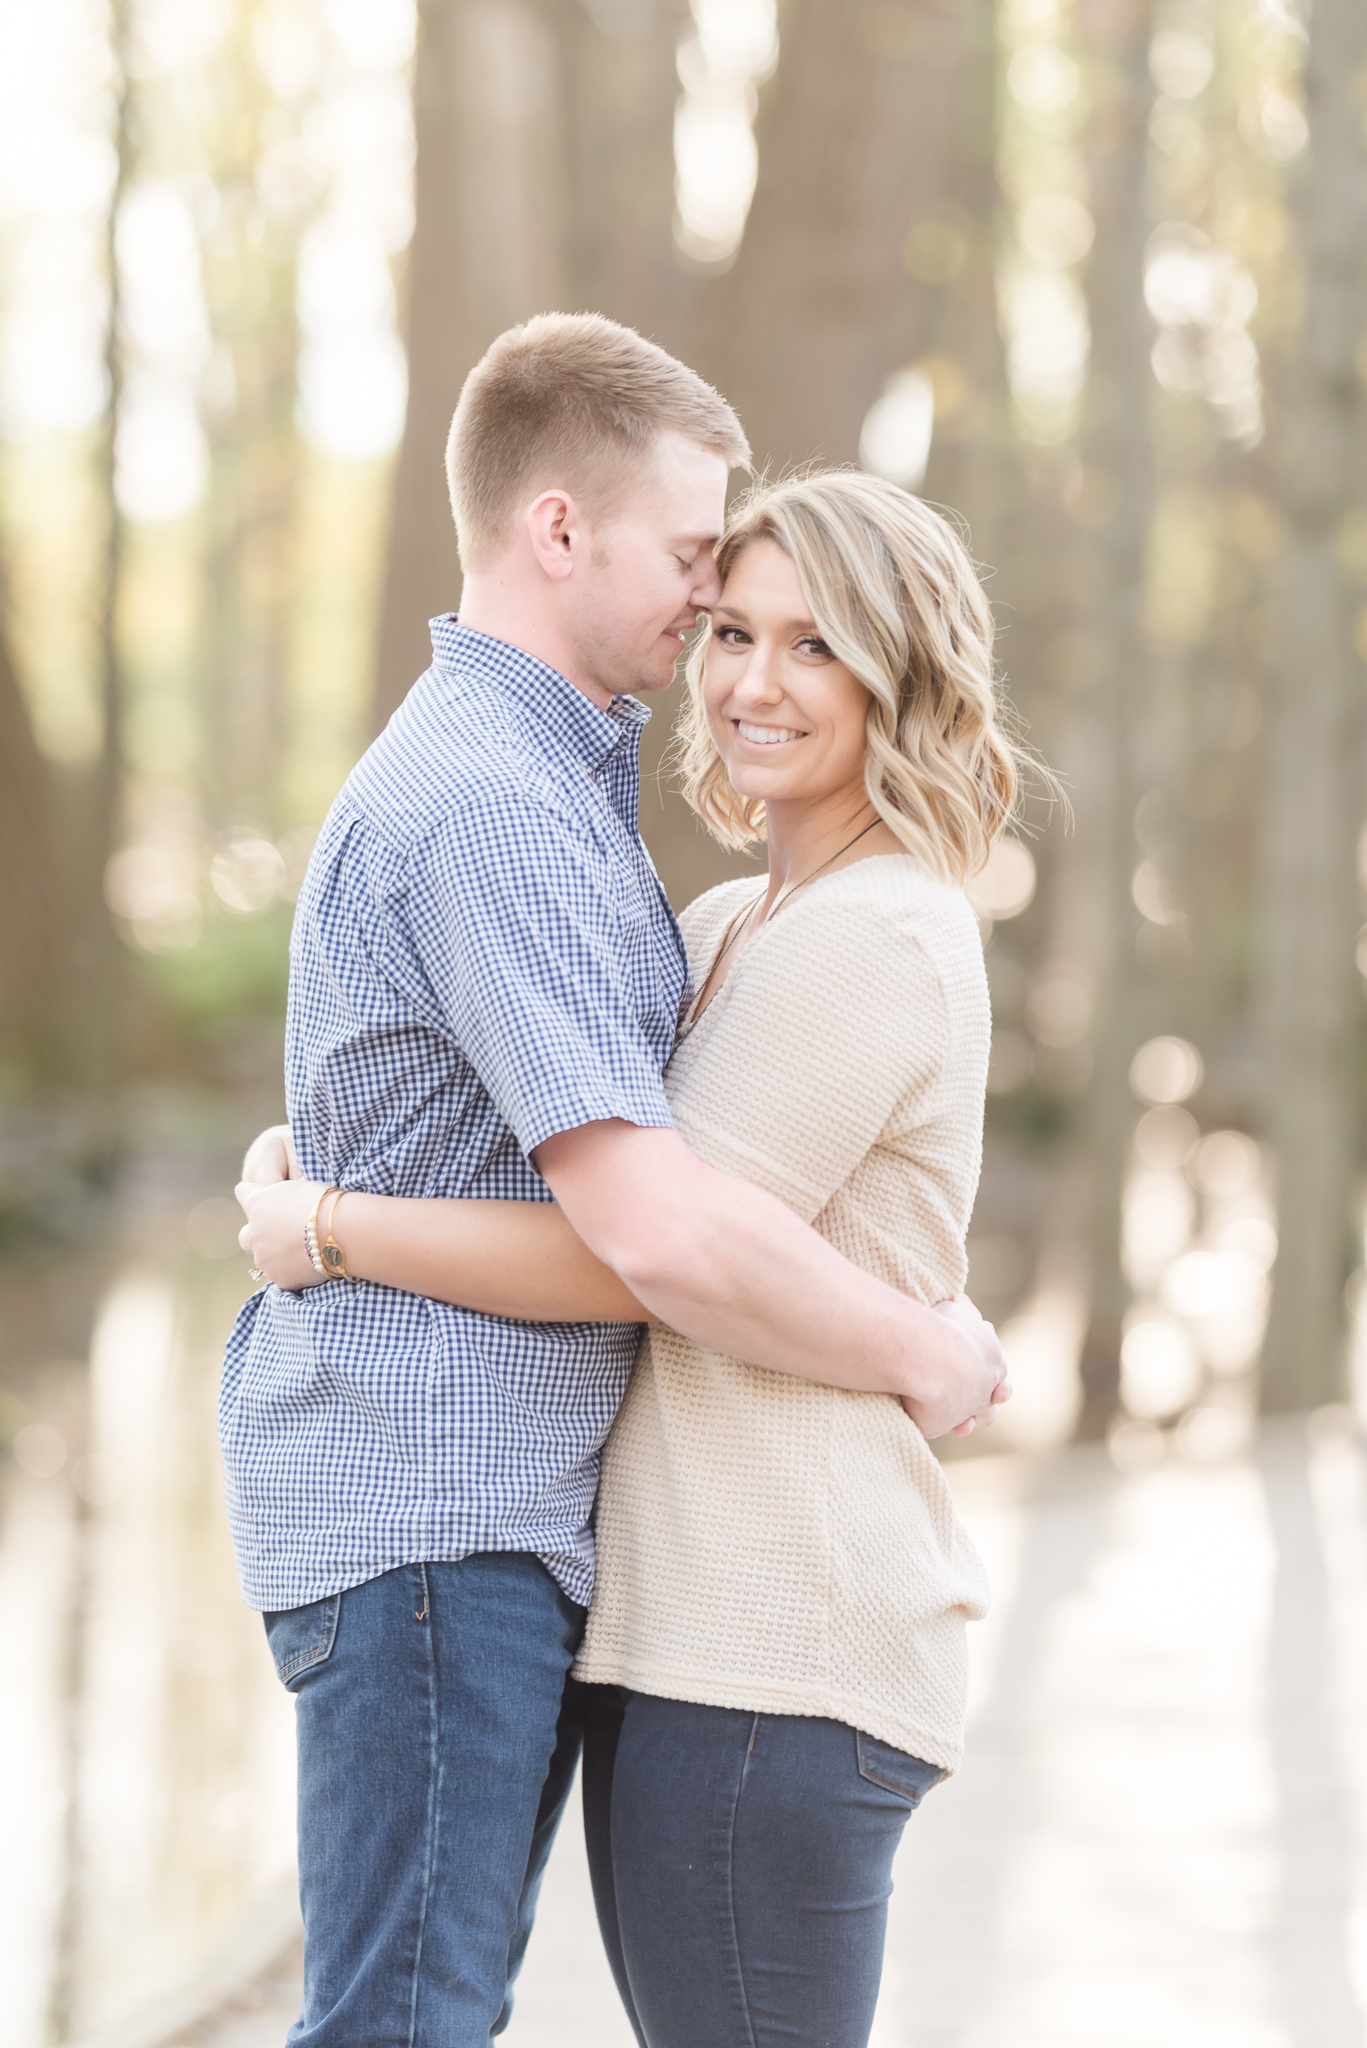 Richie Woods Nature Preserve and Mustard Seed Gardens Engagement Session Wedding Photos-11.jpg